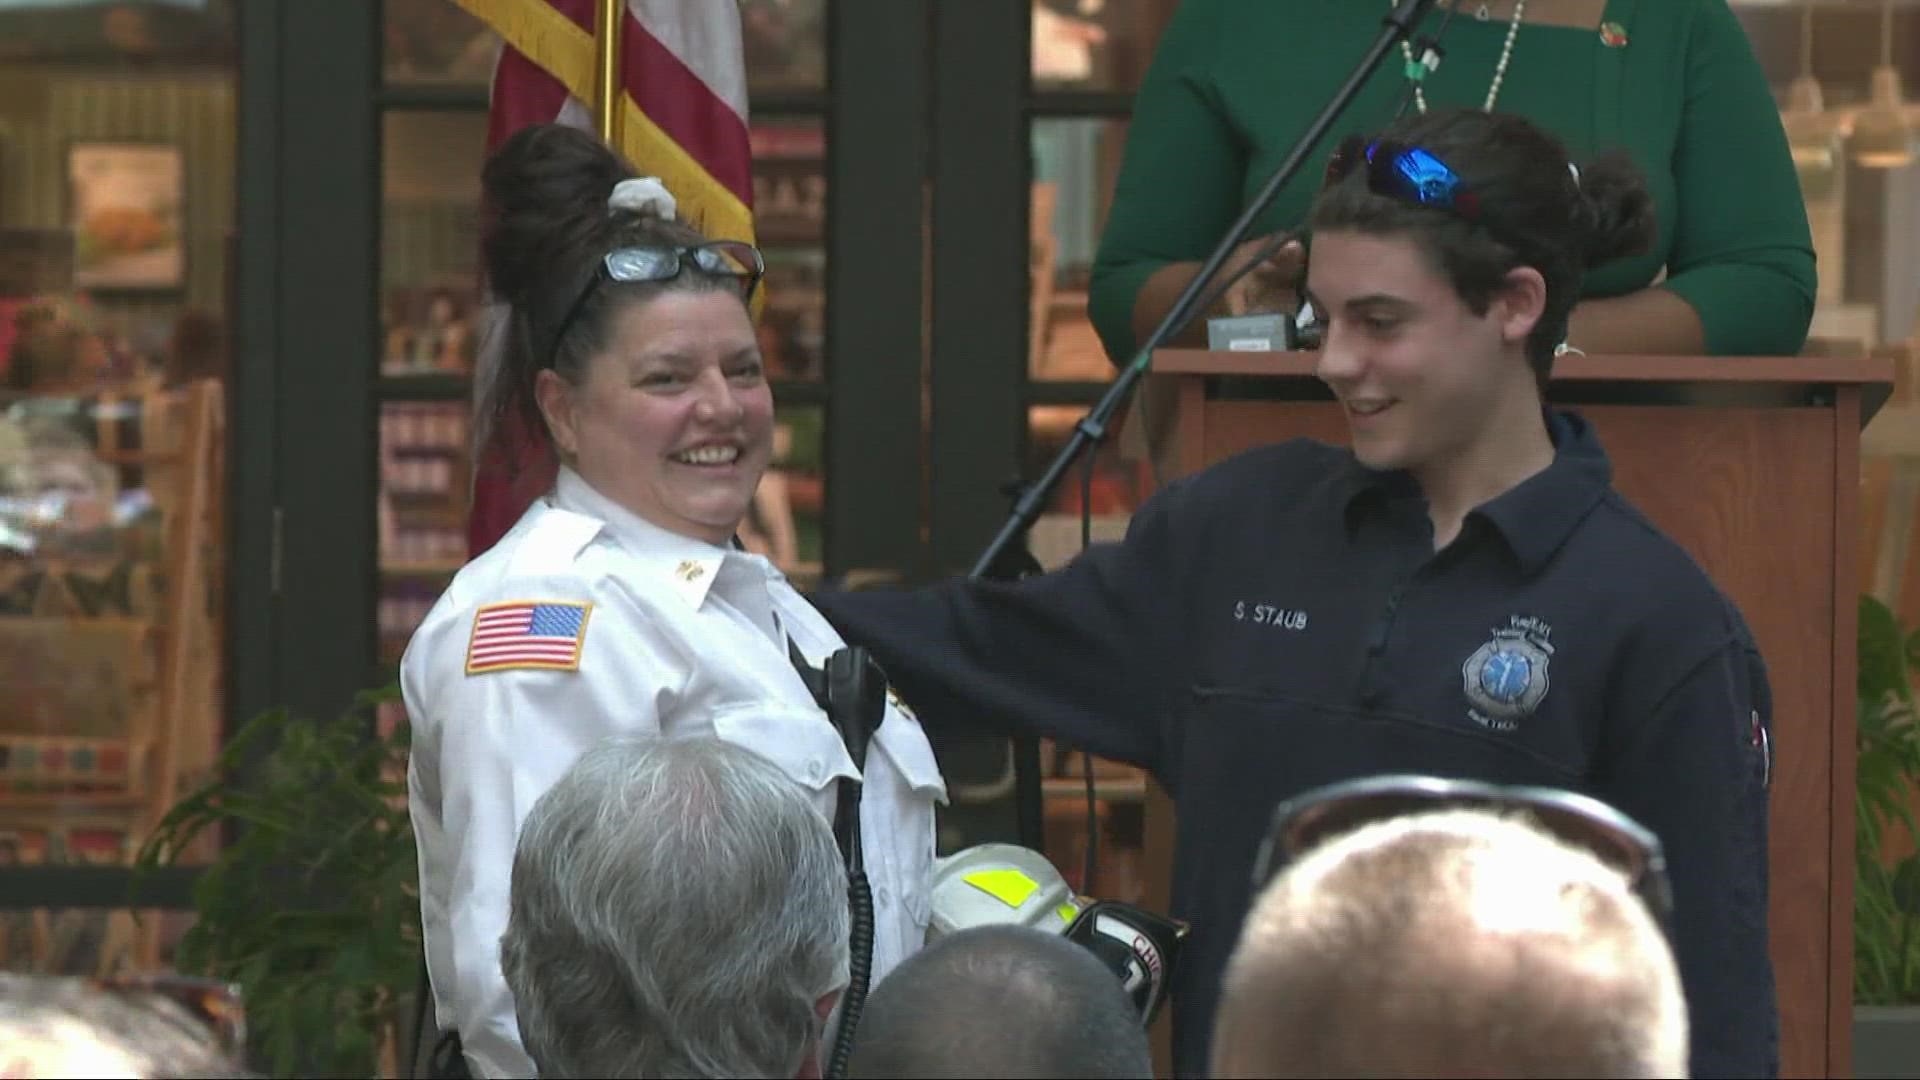 Gina DeVito-Staub is now the first female fire chief in Woodmere and in all of Cuyahoga County.